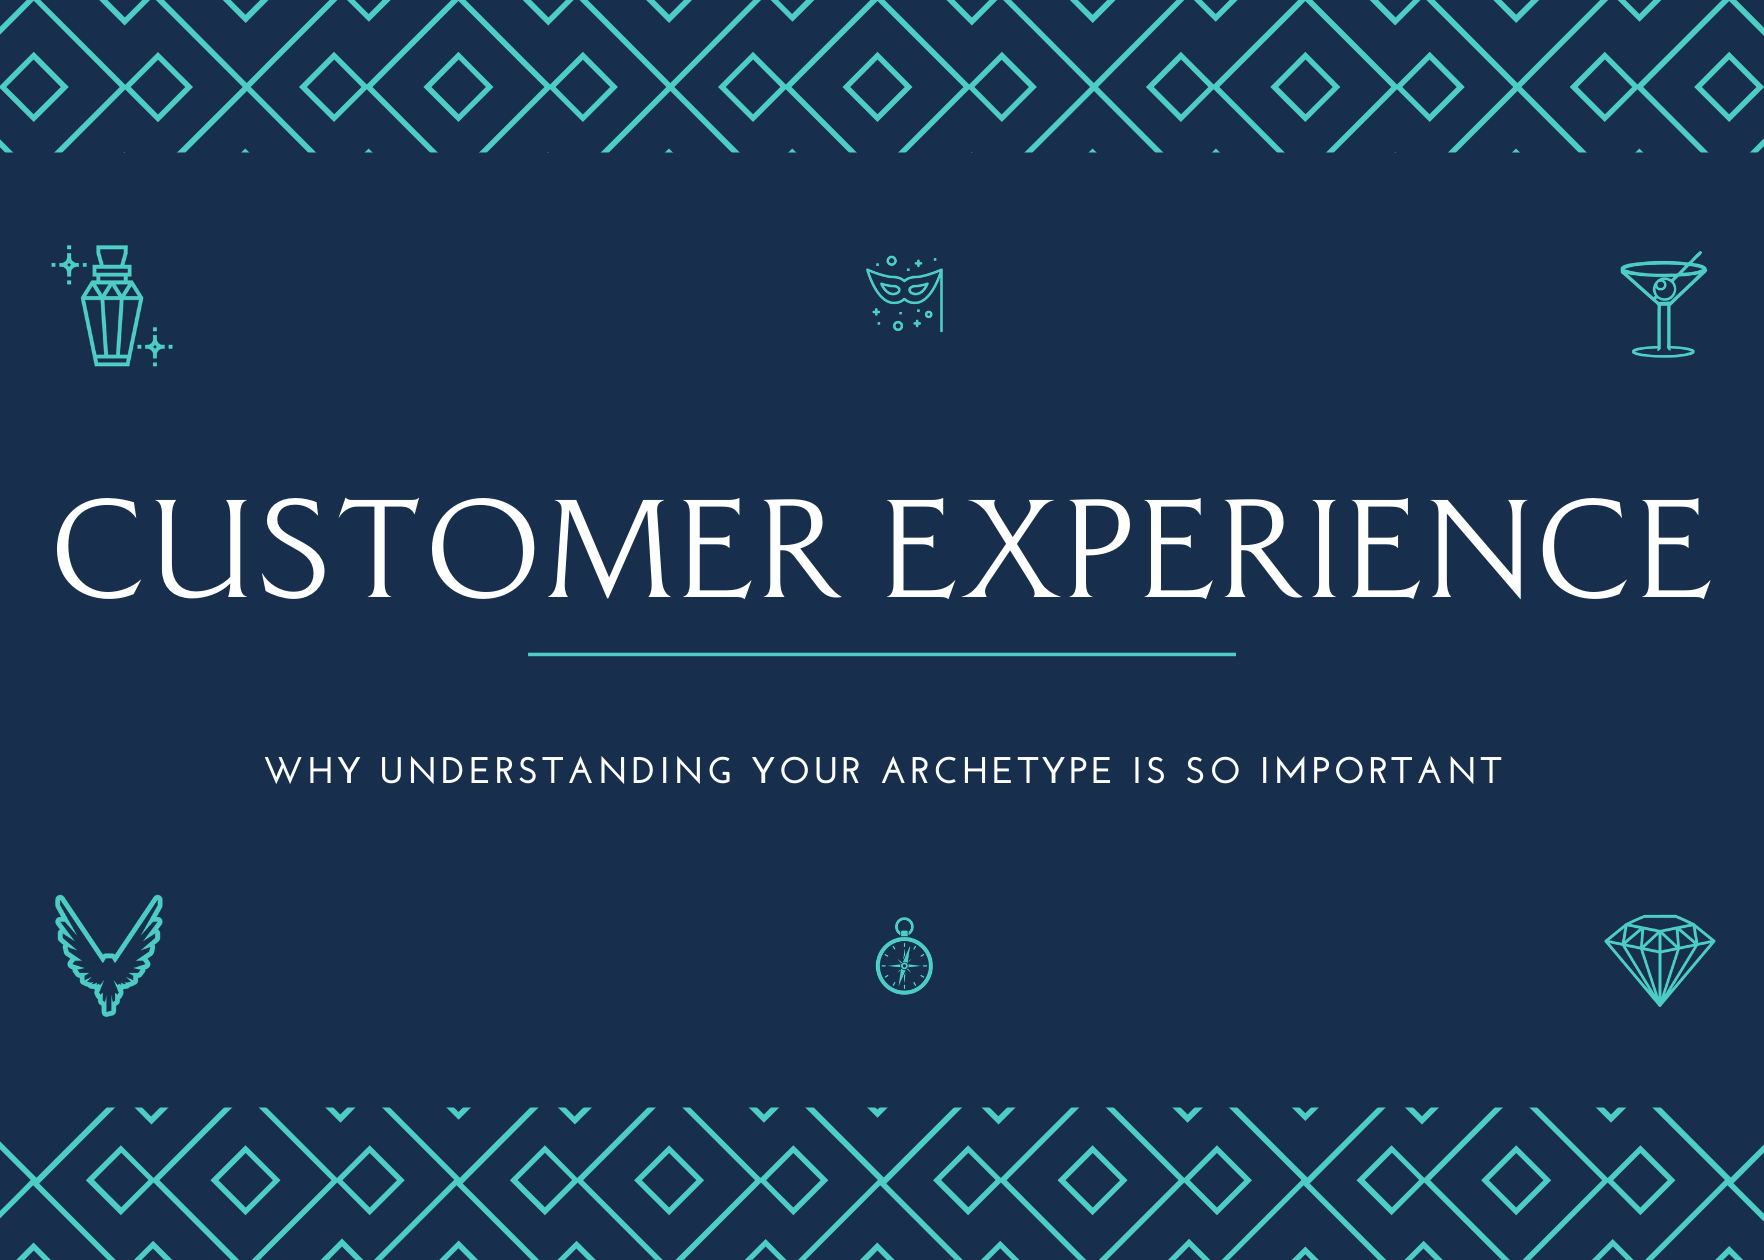 Why understanding your archetype is crucial for customer experienc